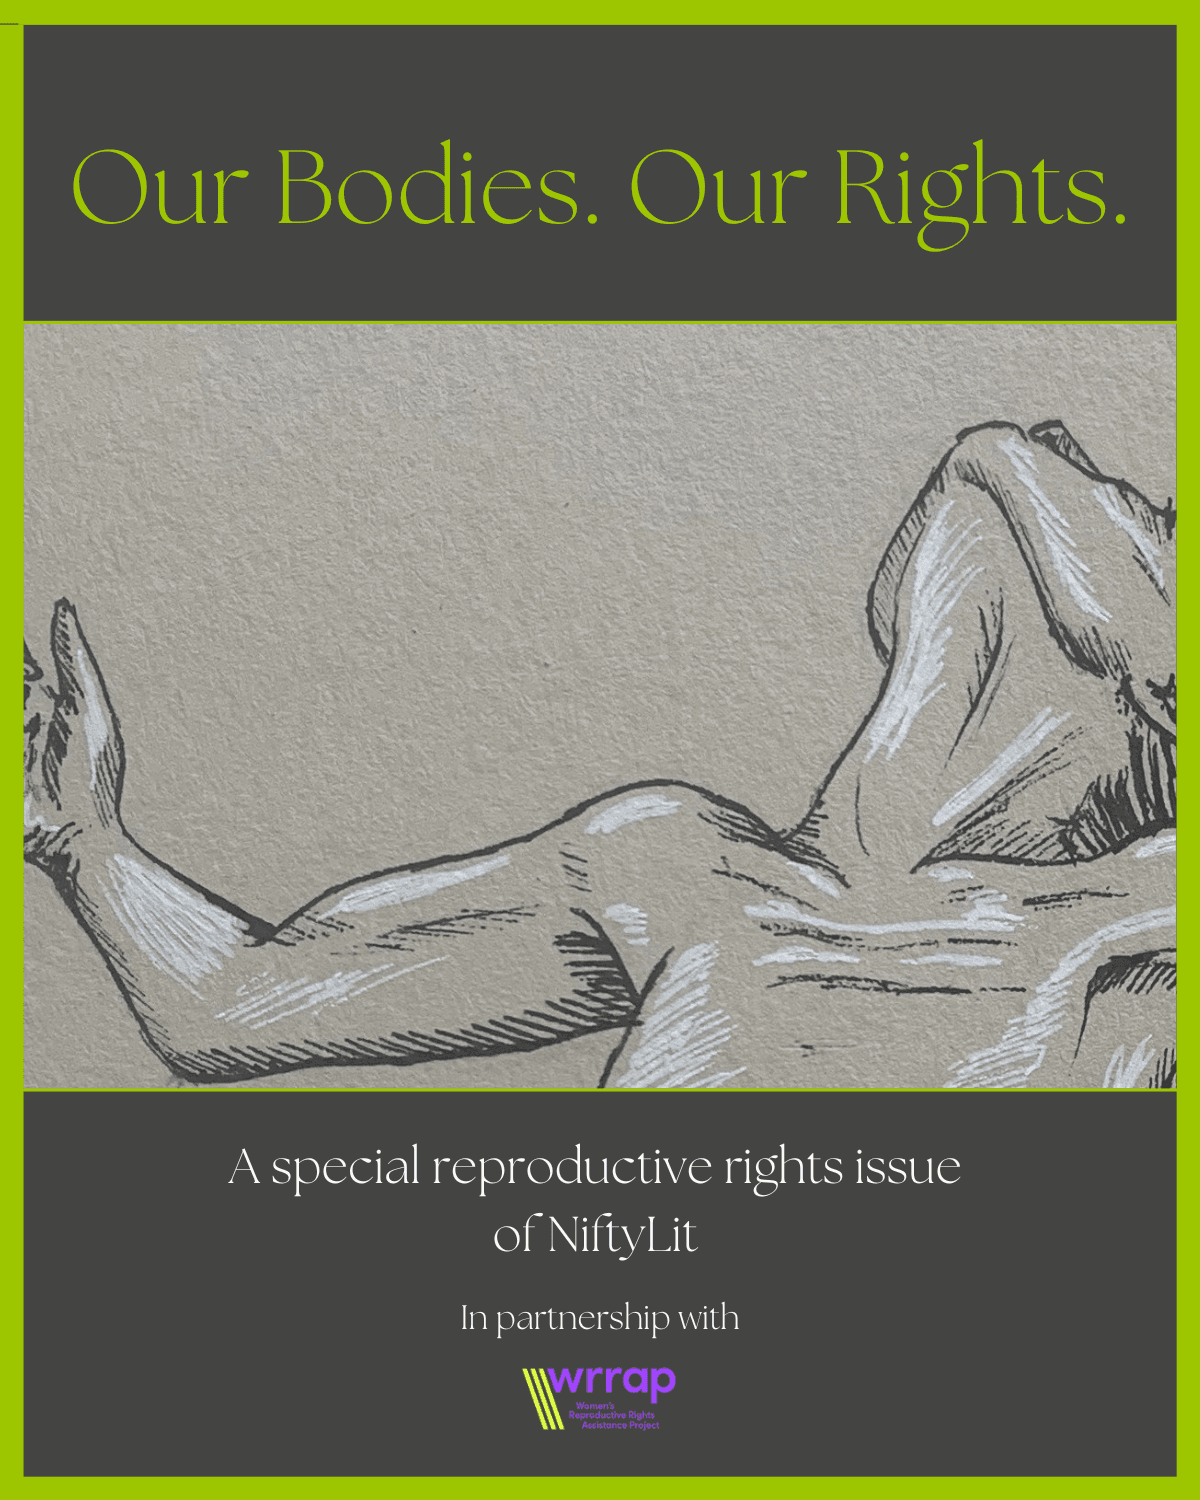 Our Bodies. Our Rights. A Special Reproductive Rights Issue of Niftylit.